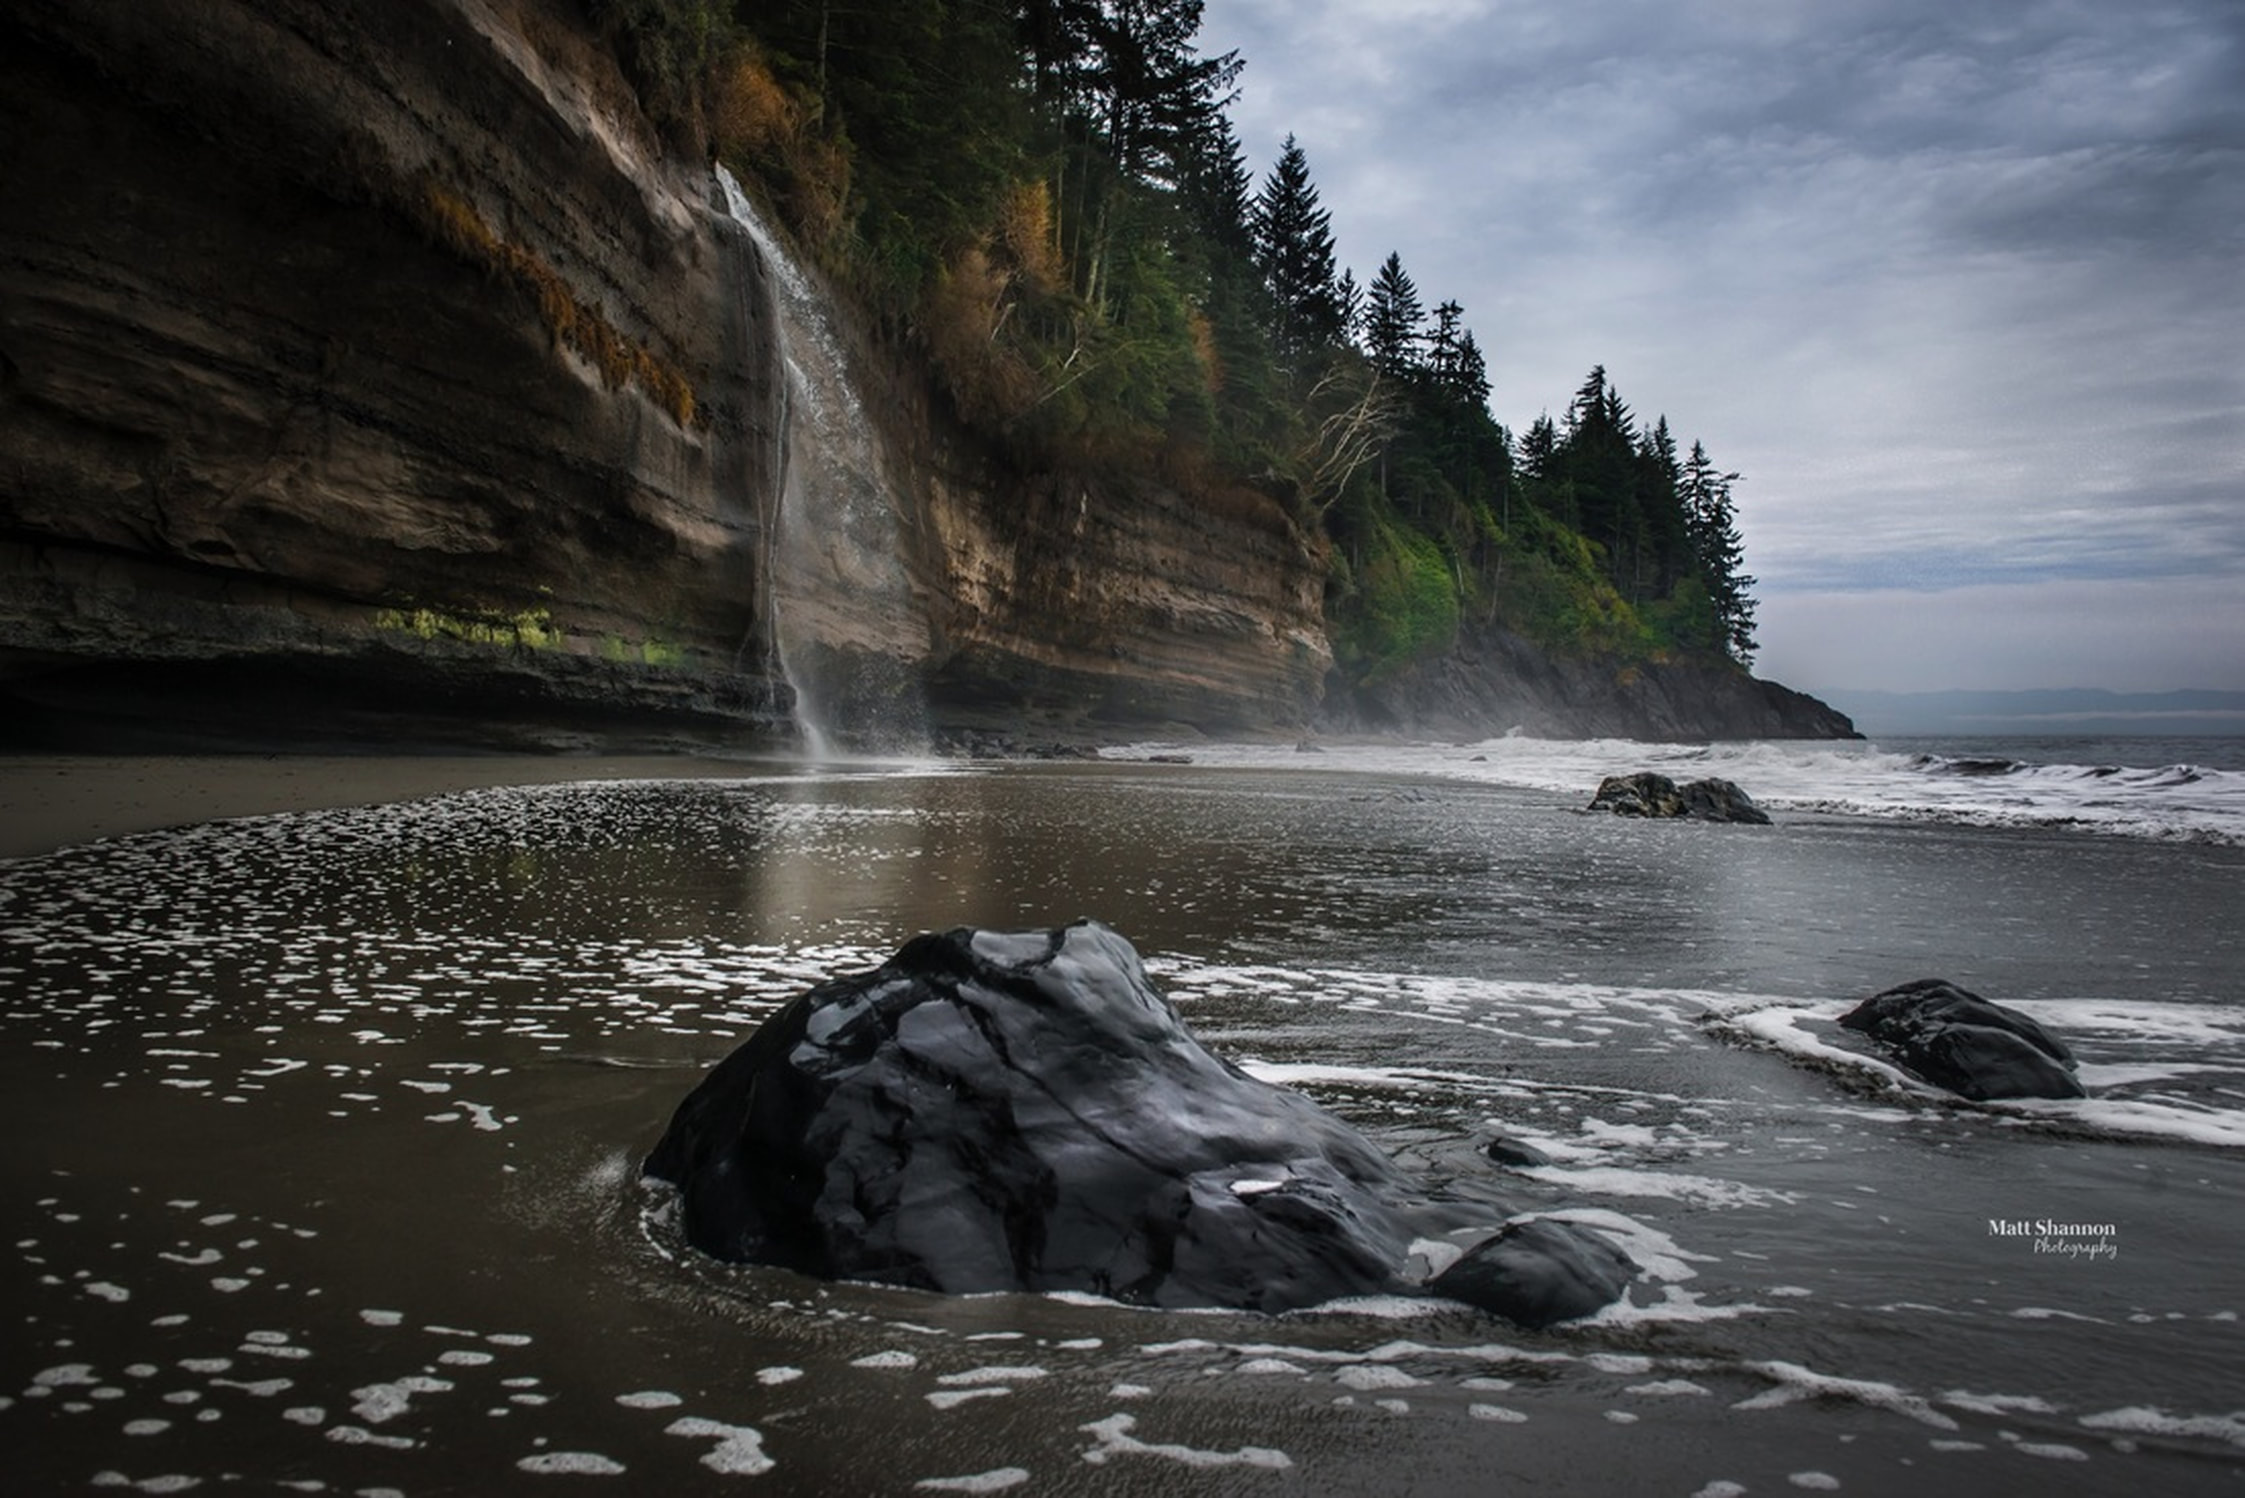 waterfall, water fall, mystic beach, beach, vancouver, victoria, vancouver island, west coast, westcoast, pacific ocean, sand, ocean, waves, sky, forest, mist, fog, colors, landscape, landscape photography, matt shannon photography, mattshannonphotography, photo, foam, rocks, rock, cliff, sooke, hick, explore, Picture